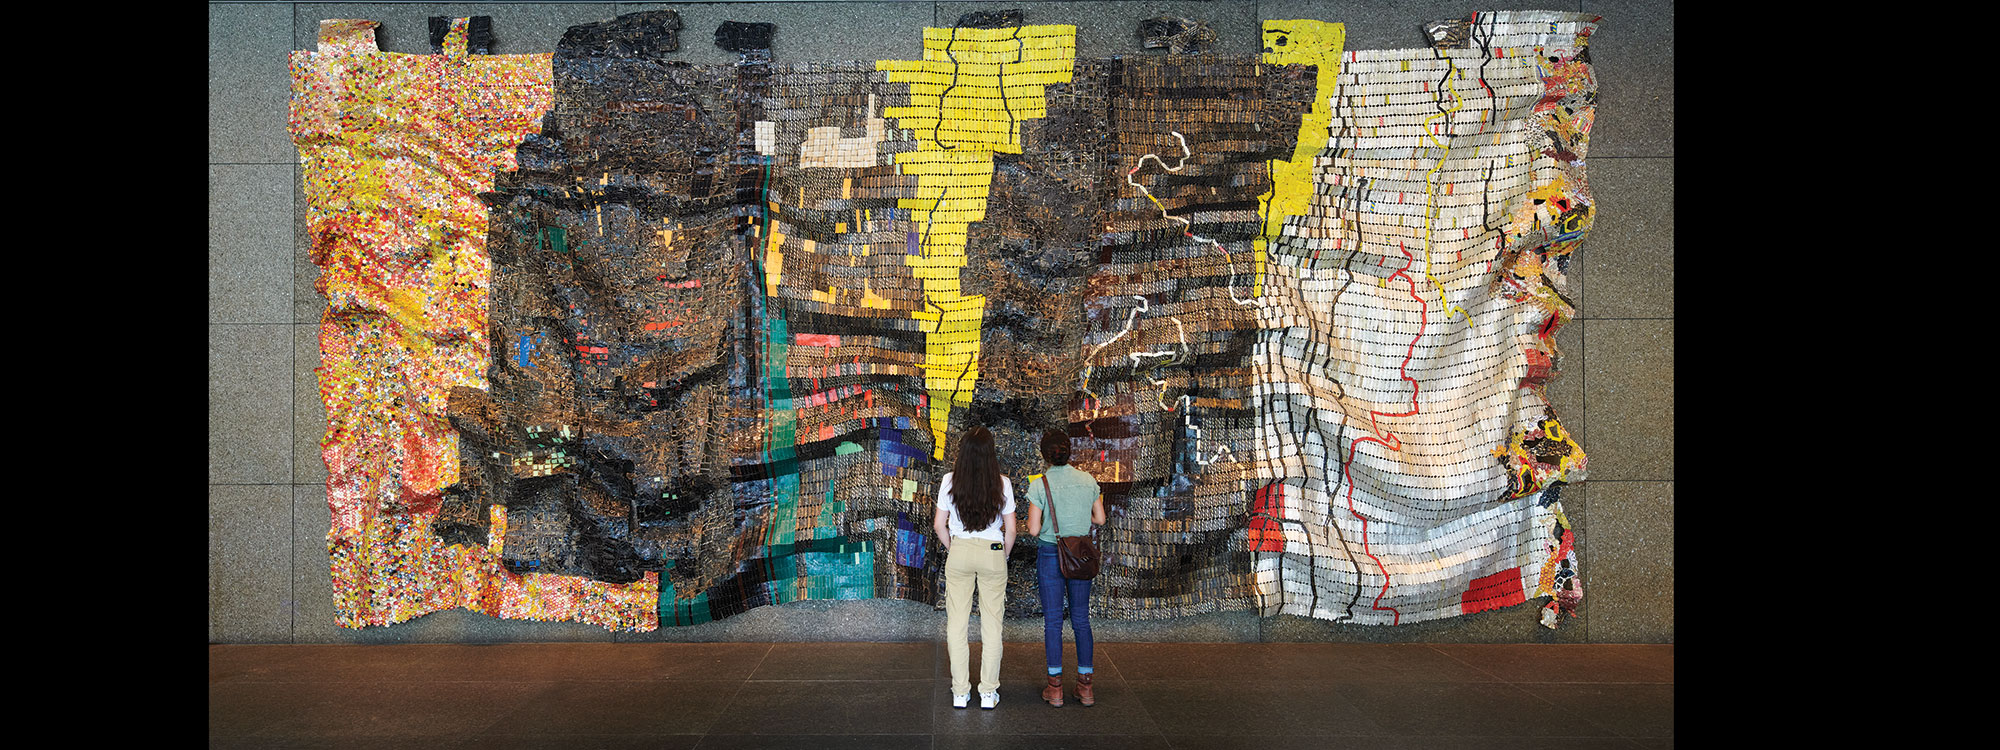 Two people standing in front of a large tapestry made of bottle caps and metal scraps.